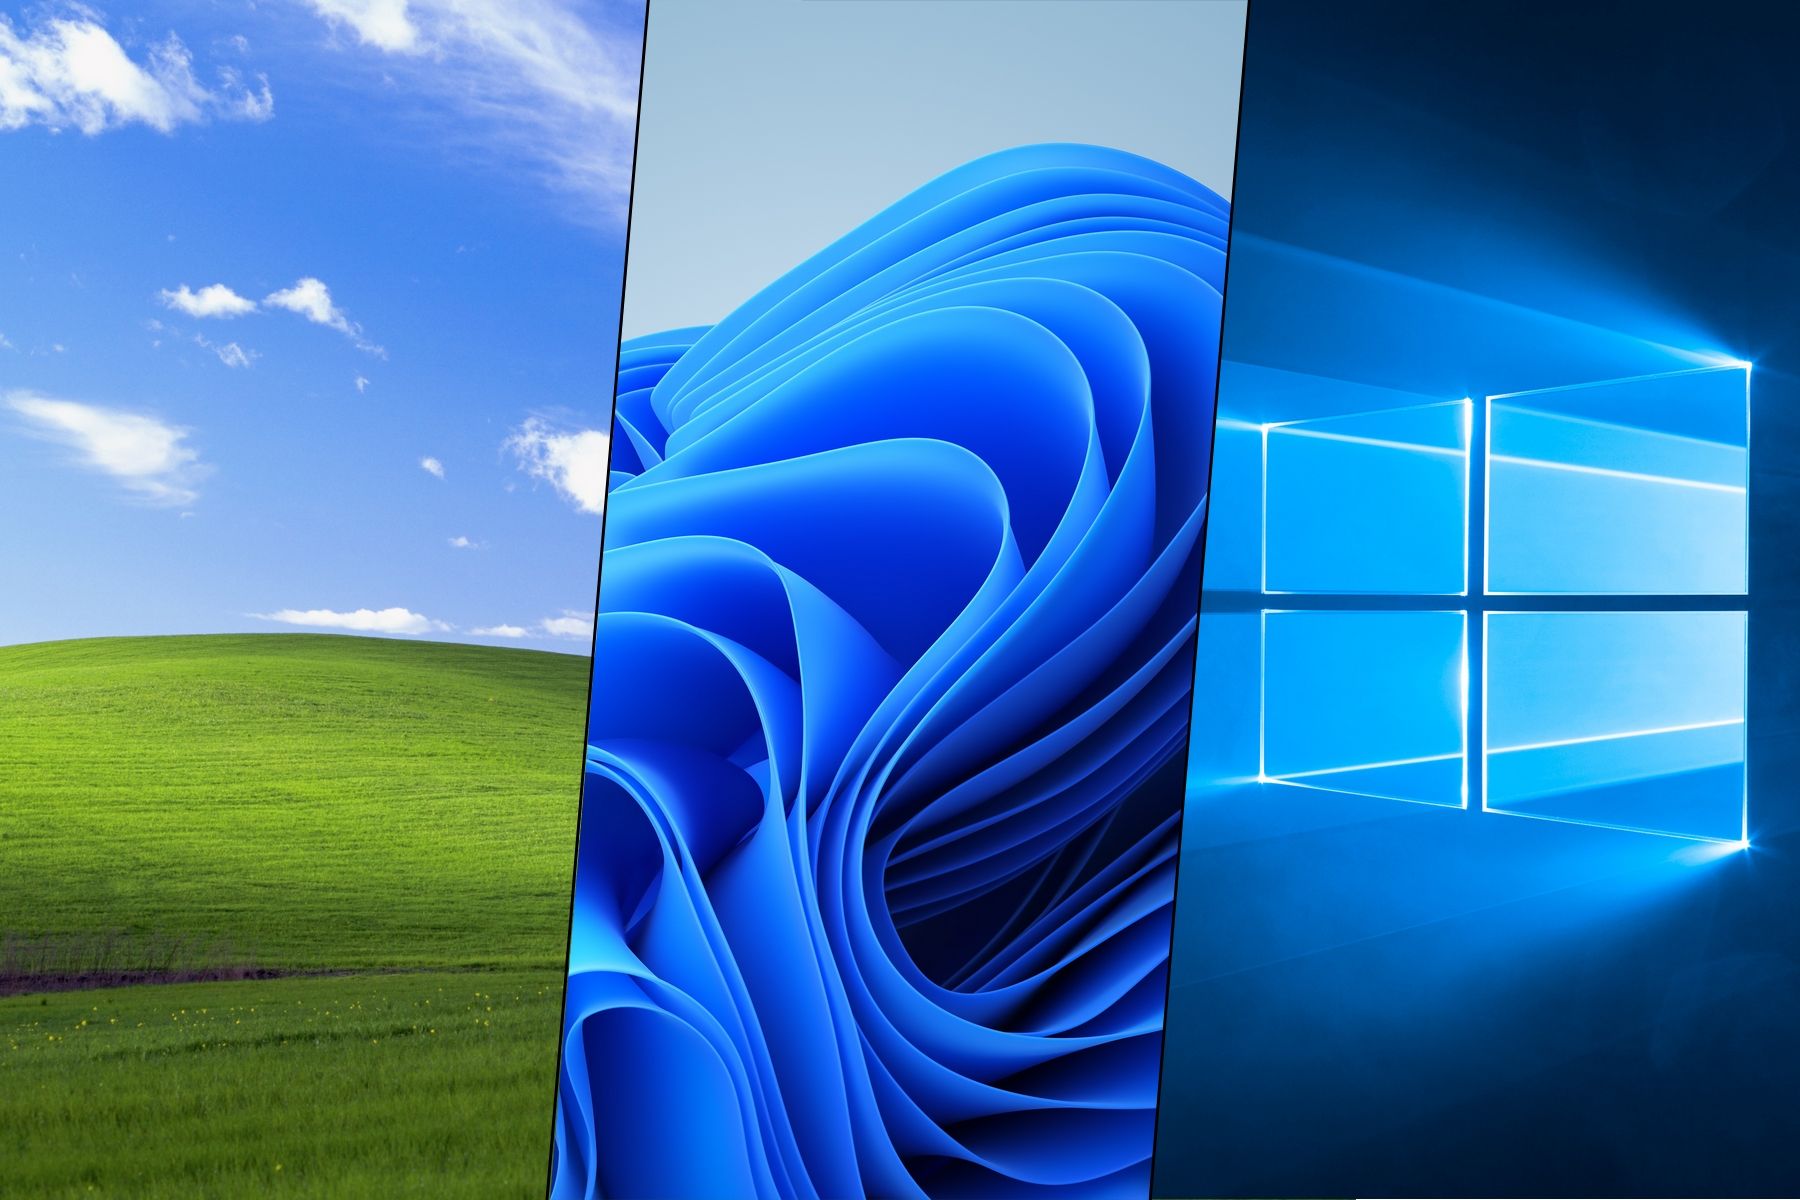 Wallpaper images from Windows XP, 11, and 10 shown side by side